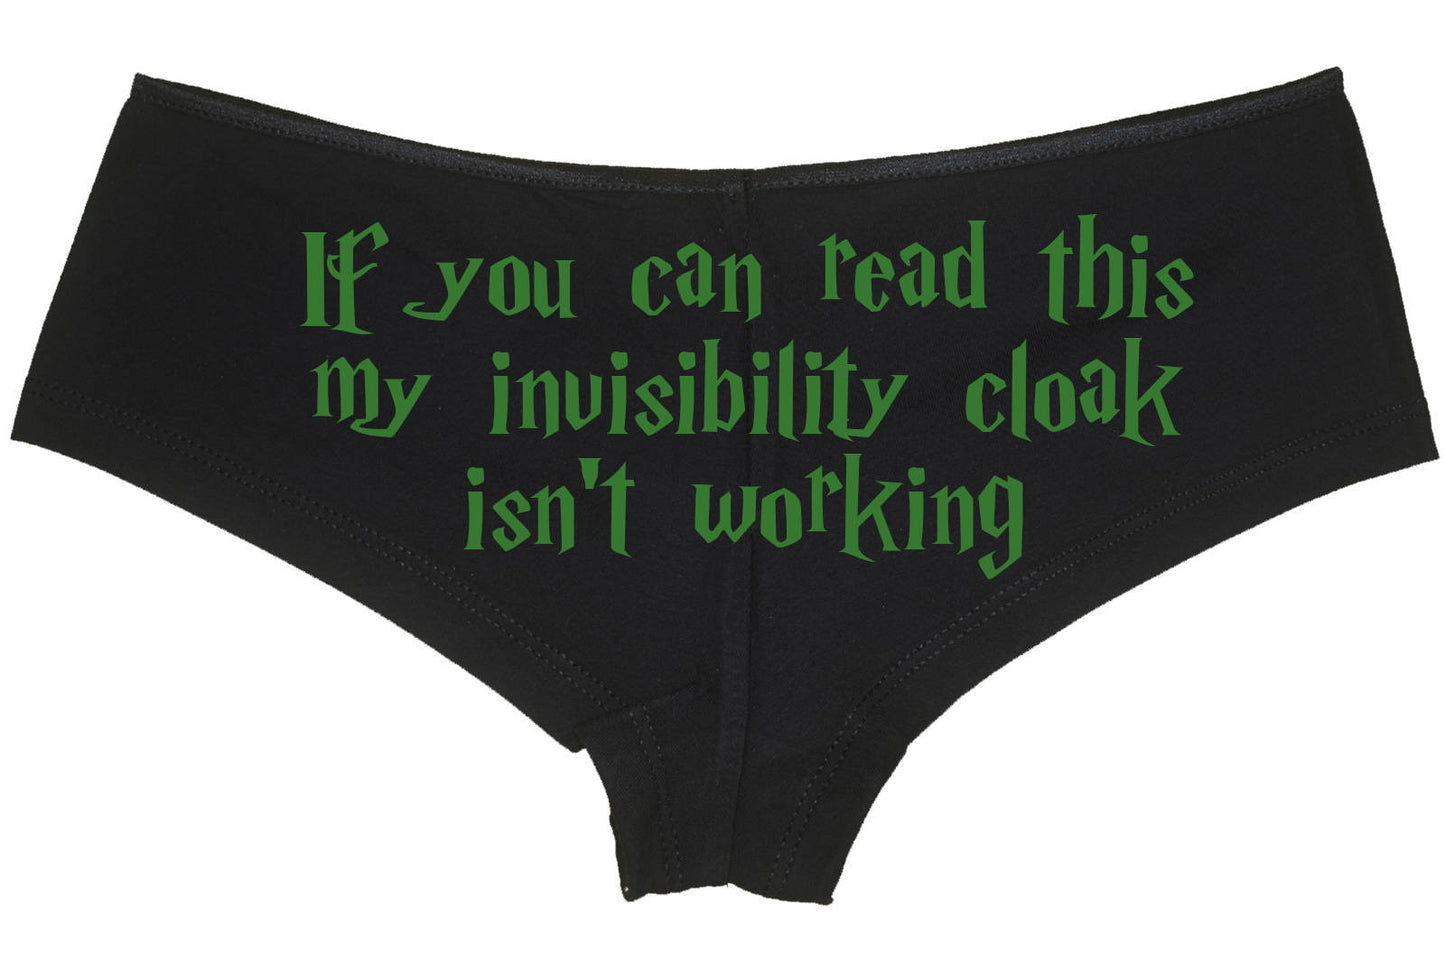 IF YOU CAN READ THIS, MY INVISIBILITY CLOAK ISN'T WORKING - BLACK BOYSHORT $$$